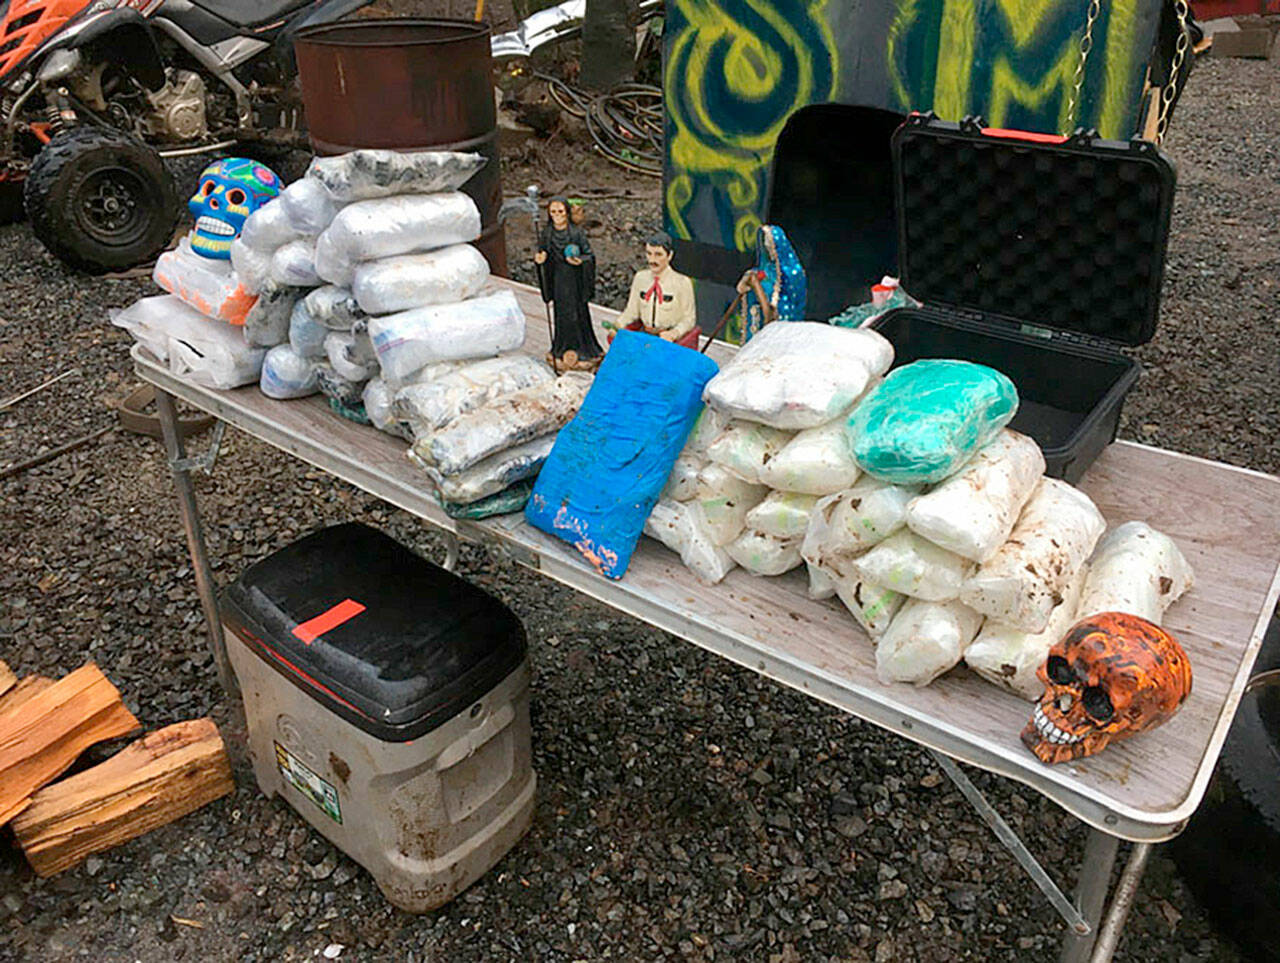 Federal agents seized many pounds of meth and heroin, along with thousands of suspected fentanyl pills, at a 10-acre property east of Arlington in mid-December 2020. (U.S. Attorney’s Office)